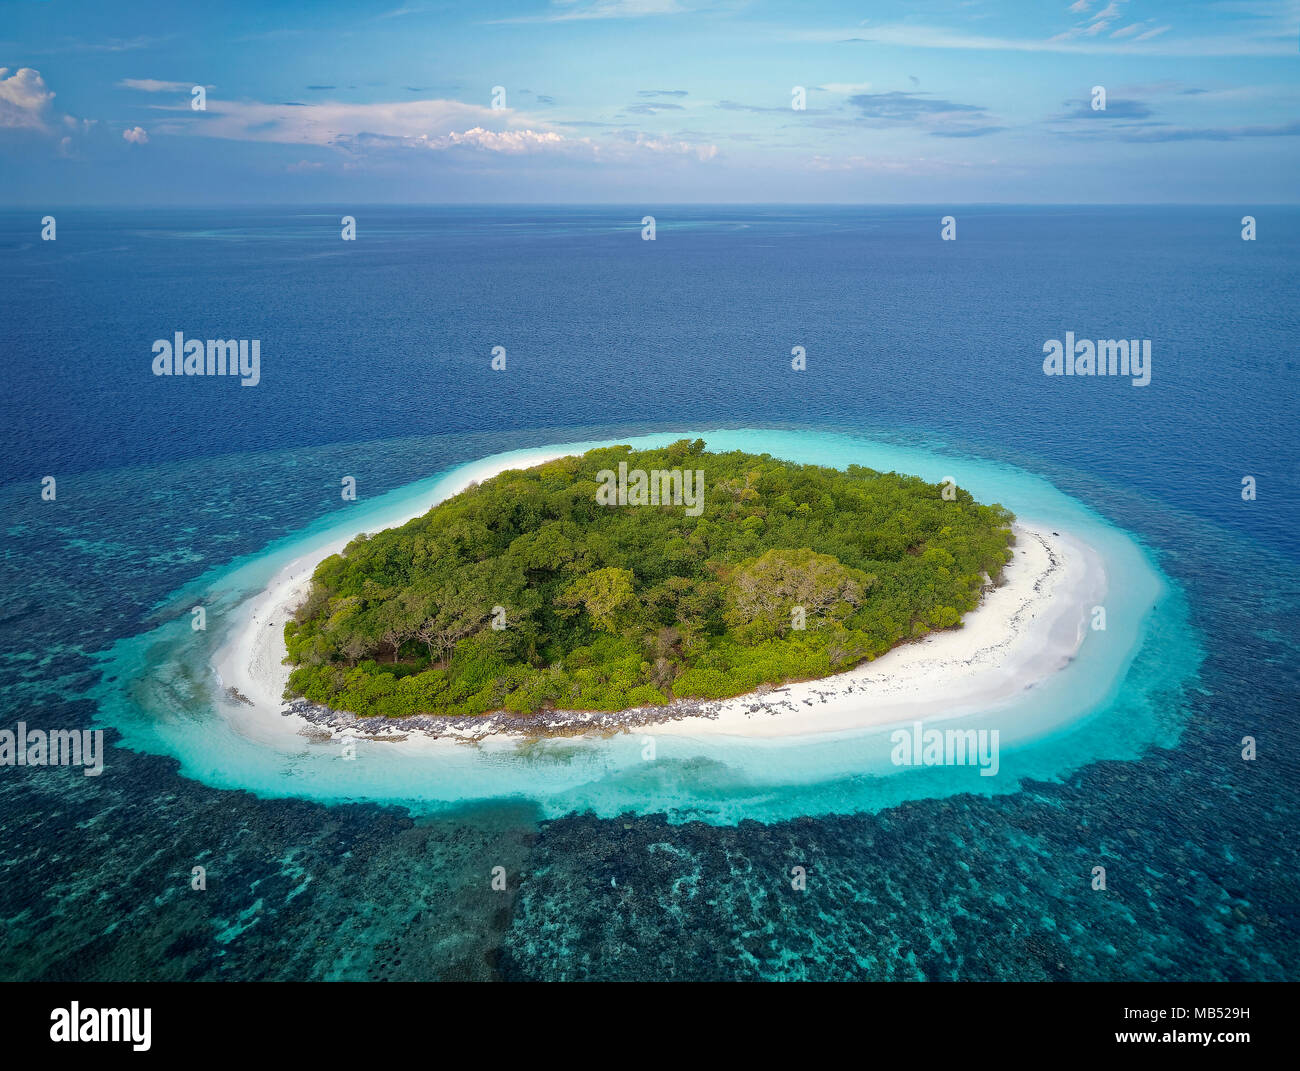 Uninhabited green island with bushes, sandy beach all around, offshore coral reef, Ari atoll, Indian Ocean, Maldives Stock Photo